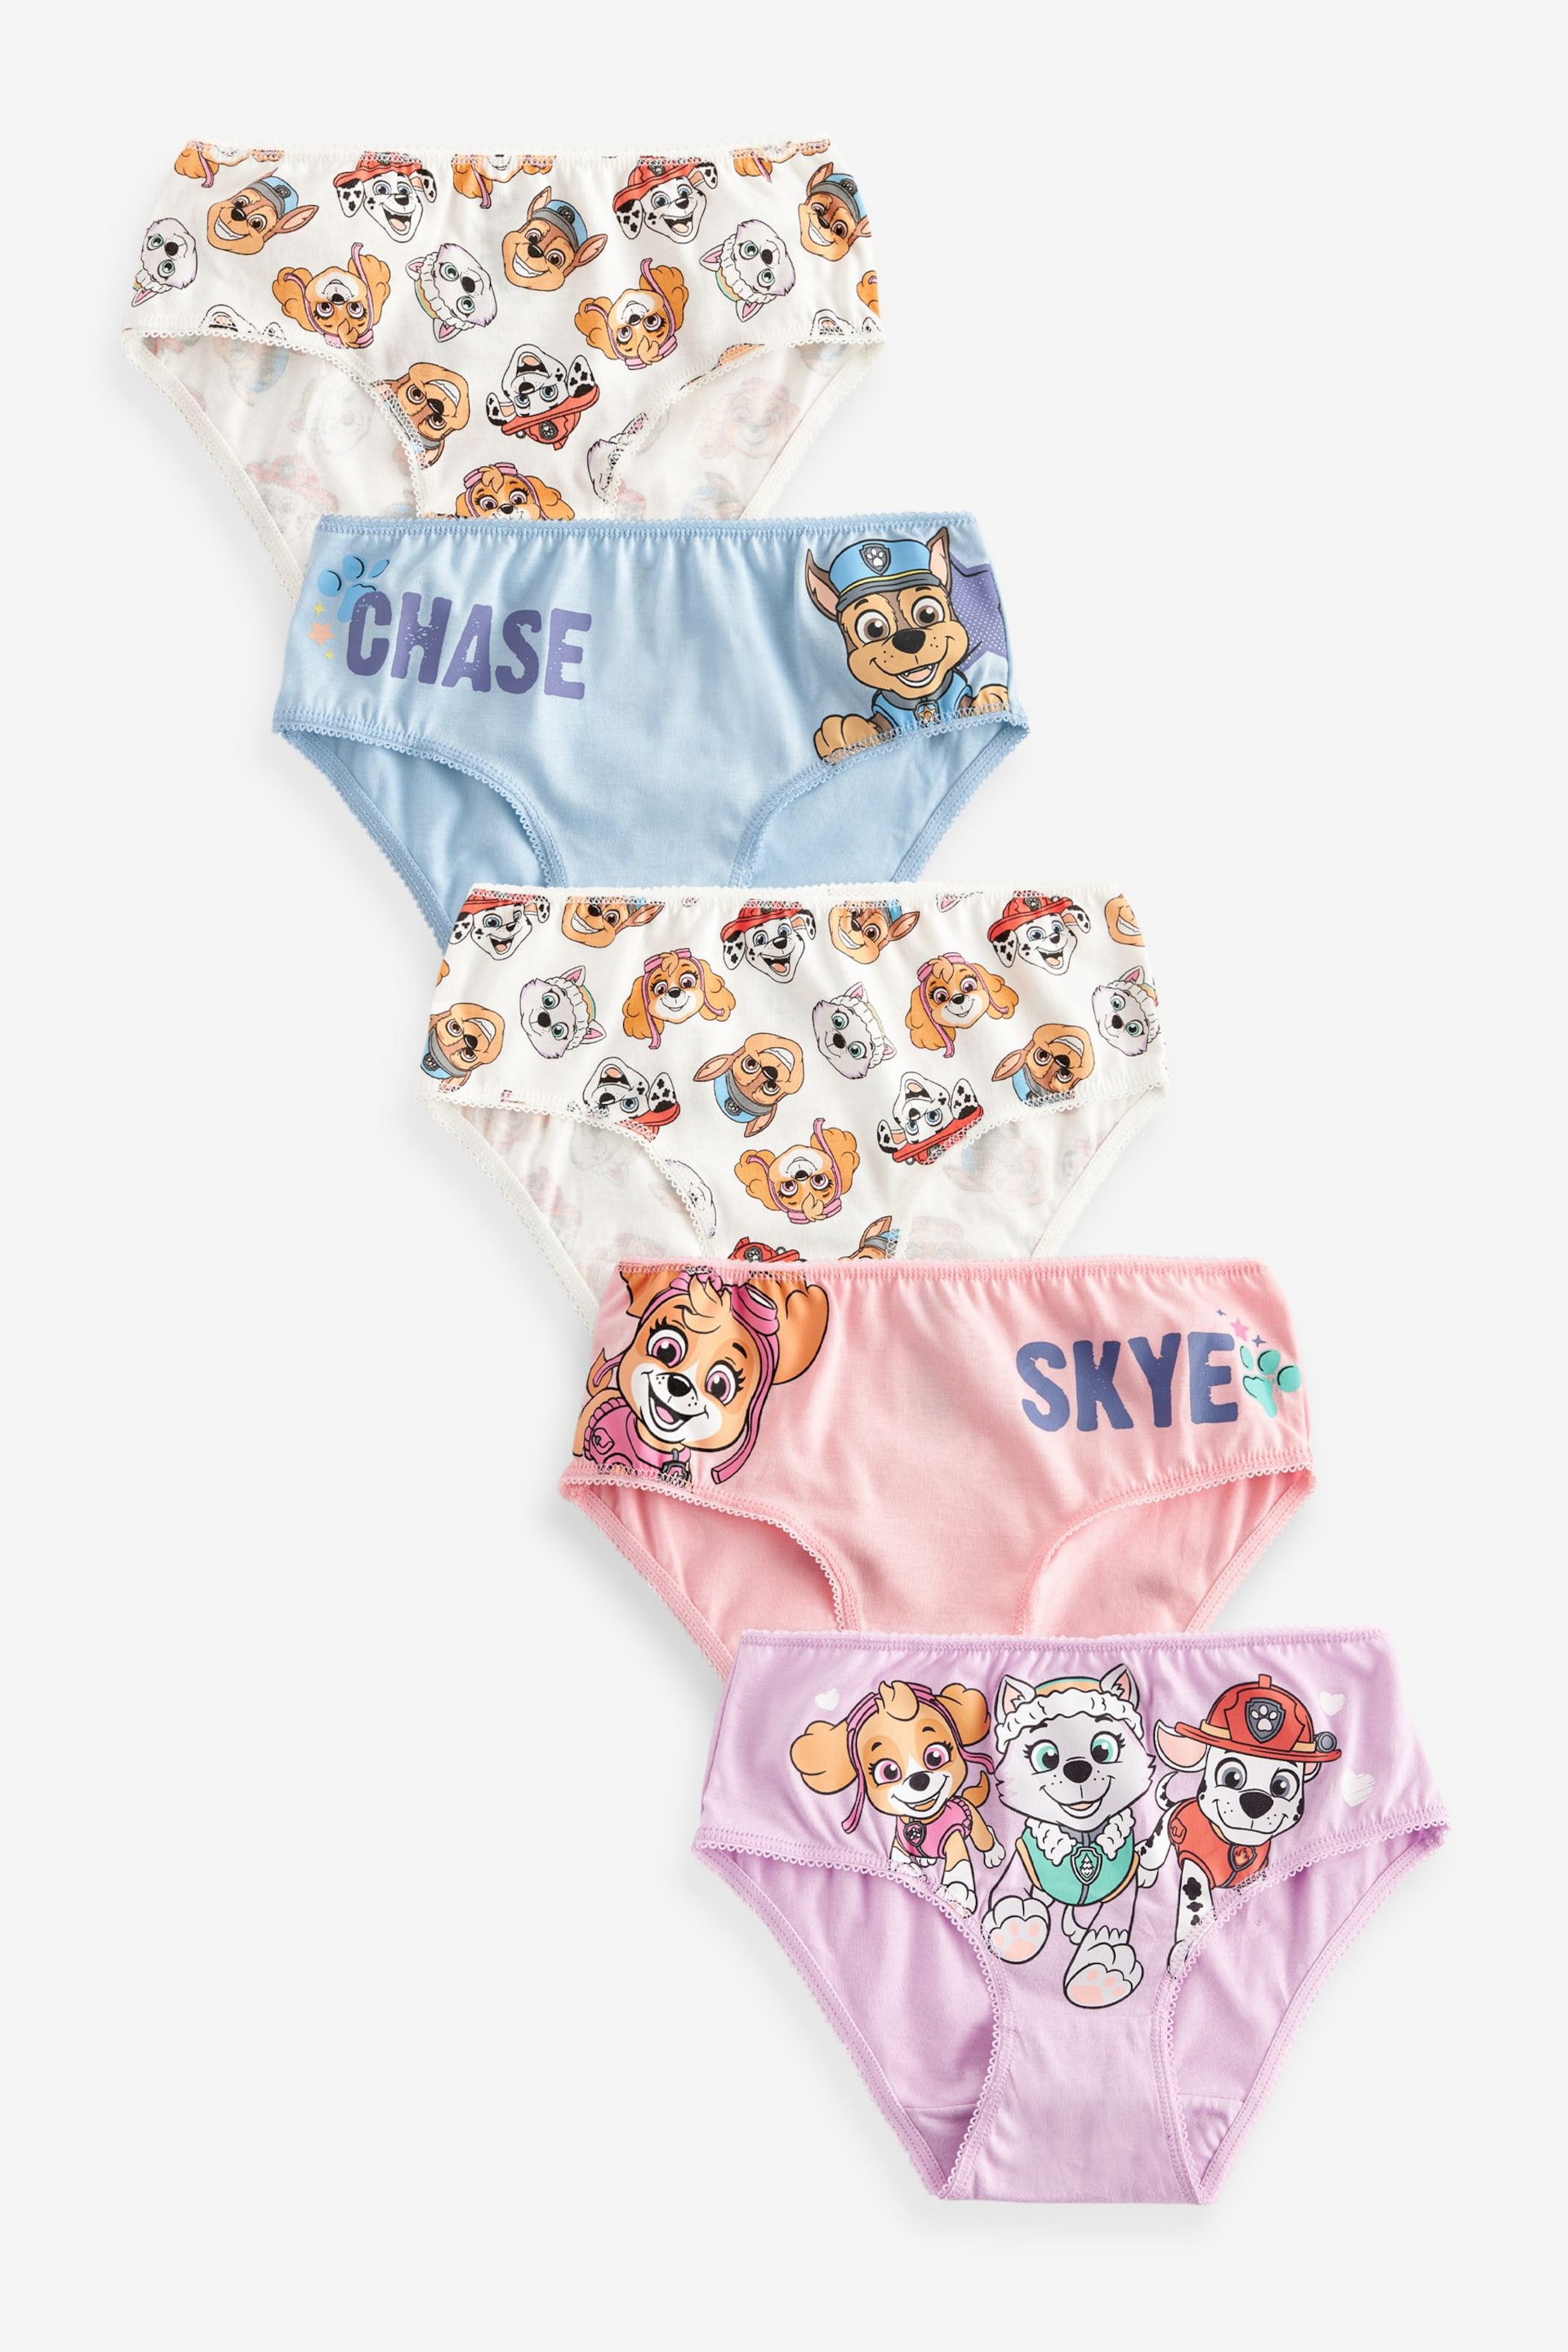 Blue/Pink Paw Patrol Briefs 5 Pack (2-8yrs) - Image 1 of 8